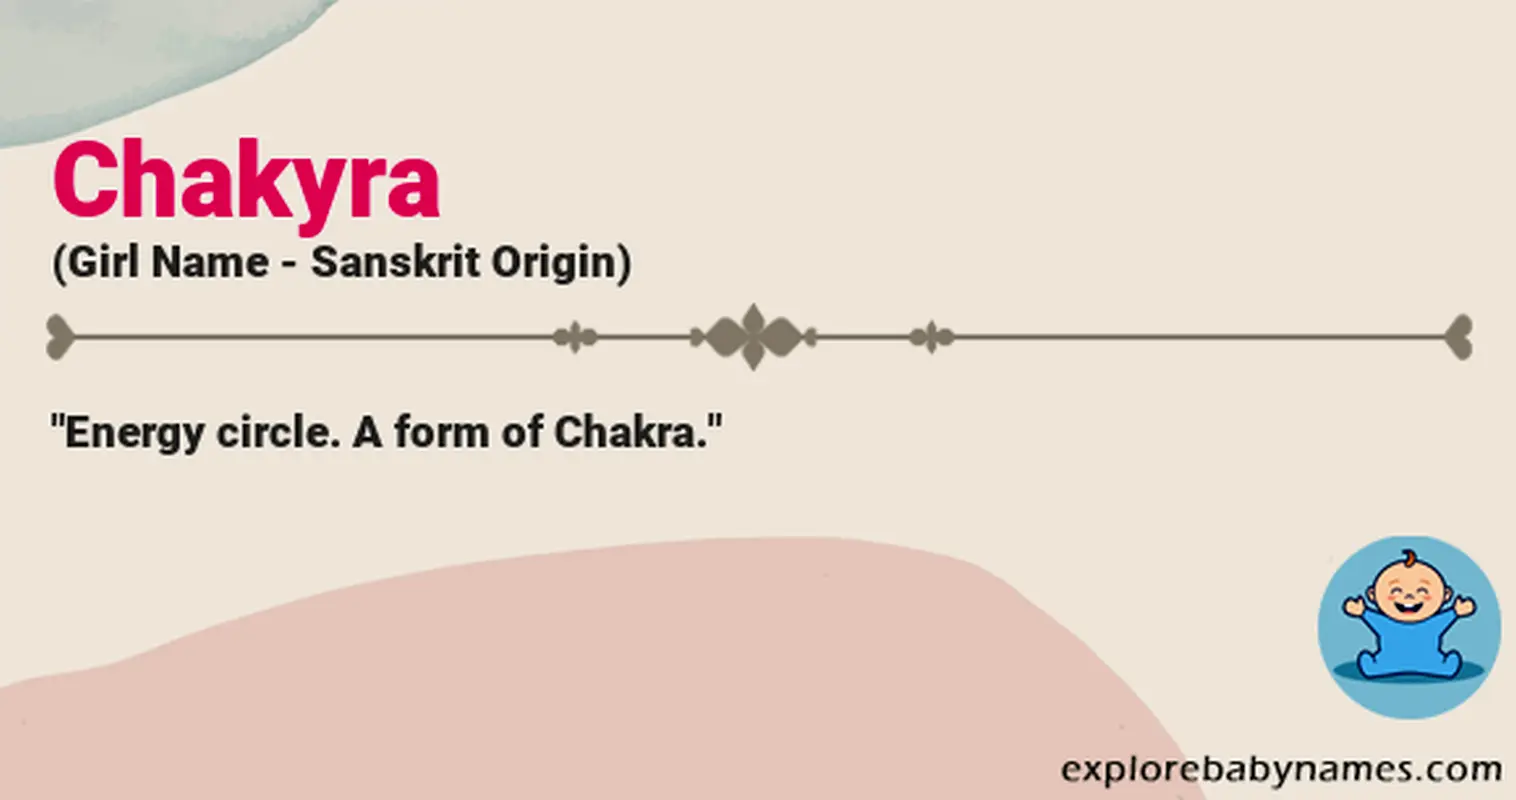 Meaning of Chakyra